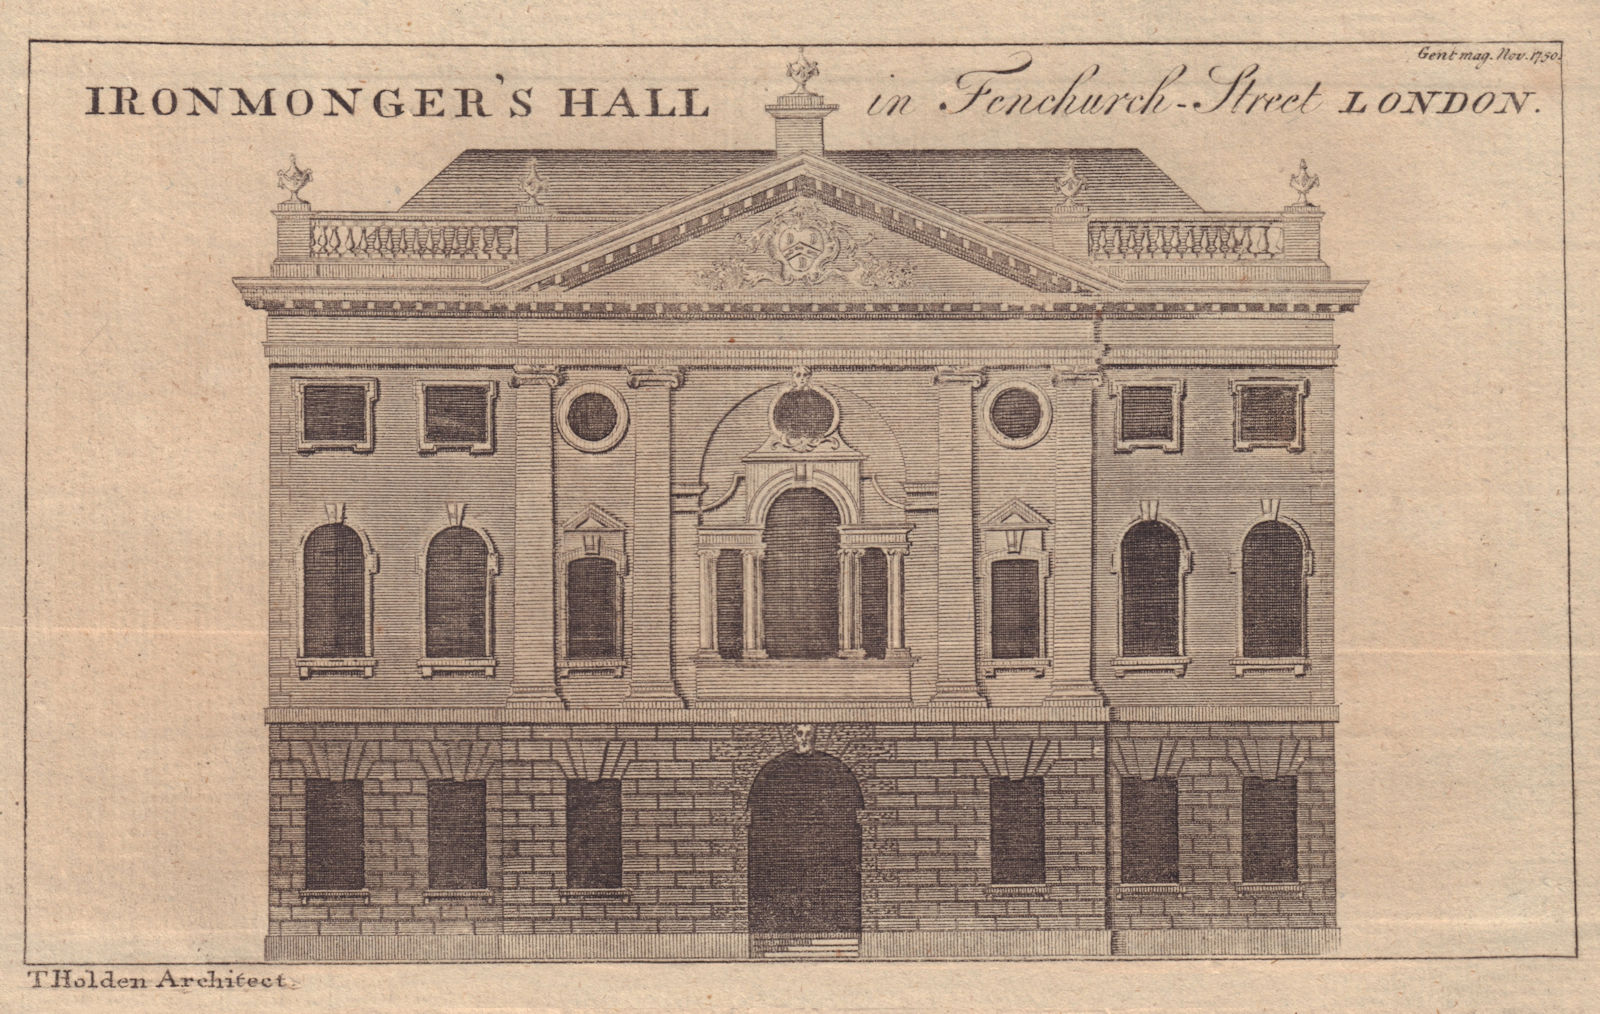 Associate Product Elevation of Ironmonger's Hall in Fenchurch Street London. GENTS MAG 1750